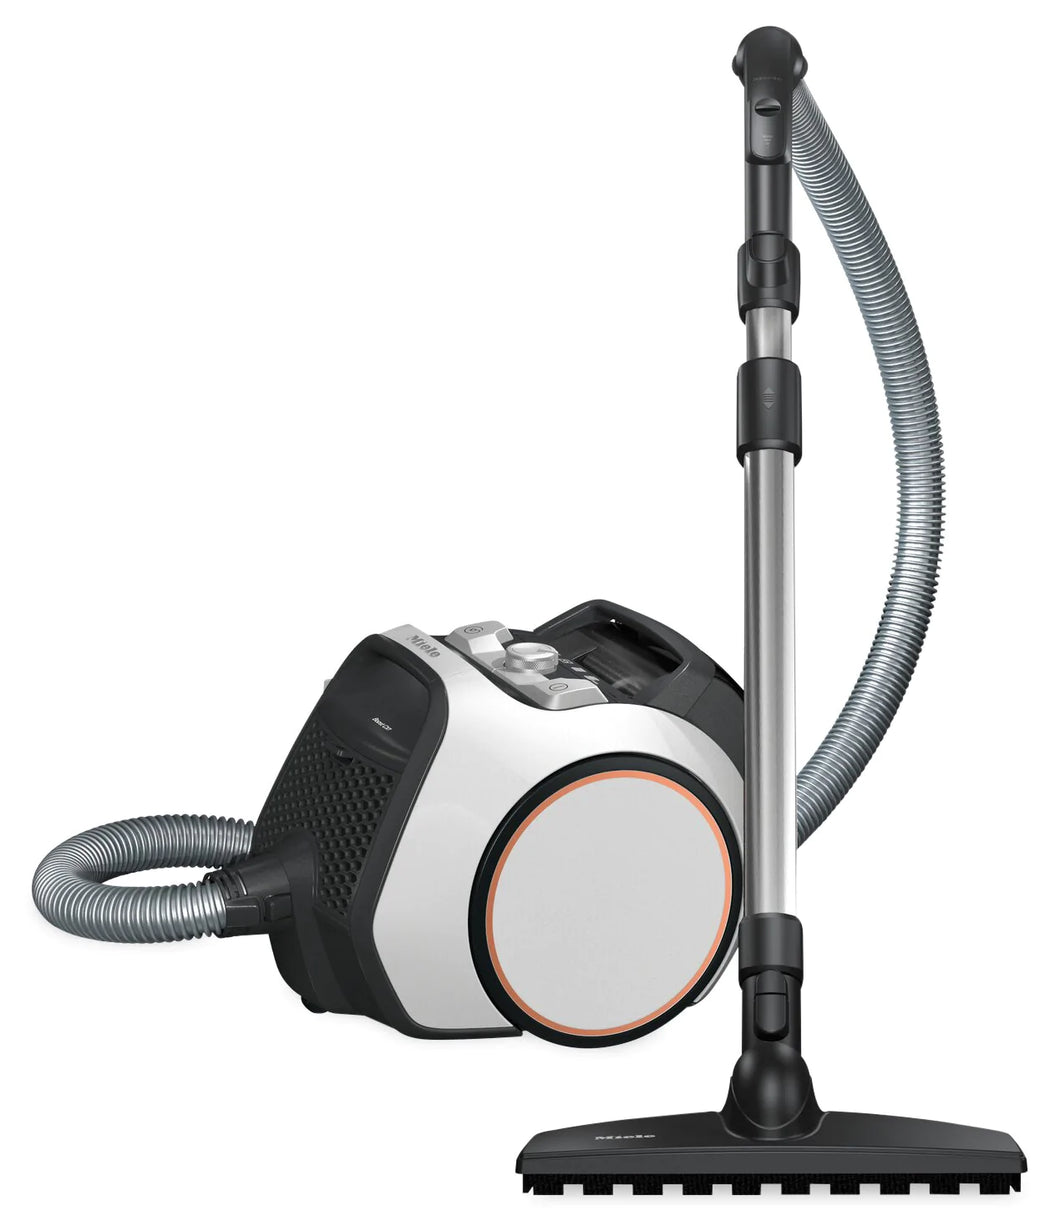 Miele Boost CX1 Parquet PowerLine Bagless Canister Vacuum